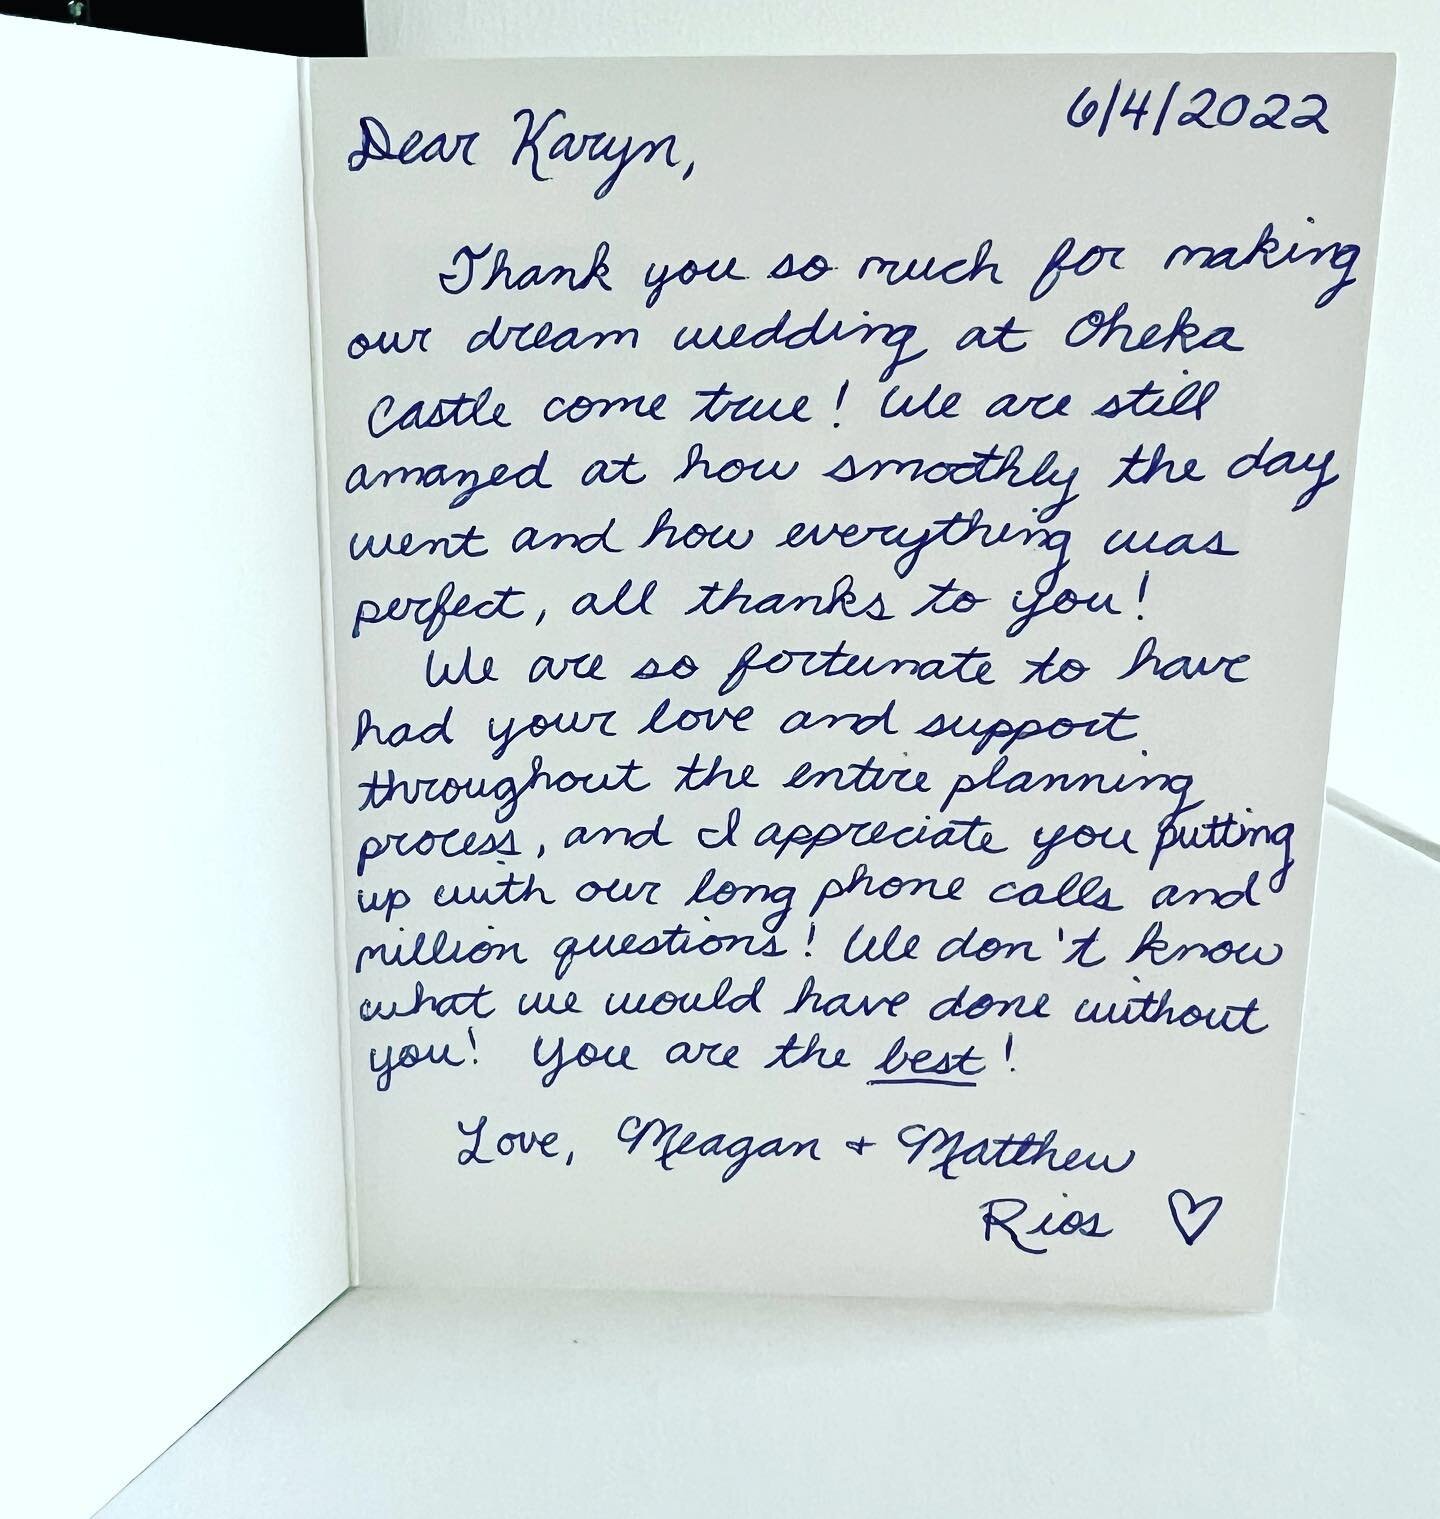 We love you too Meagan + Matthew. Thank you for the kind words, it was an honor and a privilege. XO. 
❣️
#wedding #castlewedding #weddingplanner #karynmichaelevents #ohekacastle #ohekacastlewedding #ohekacastleweddings @oheka_weddings_and_events @ohe